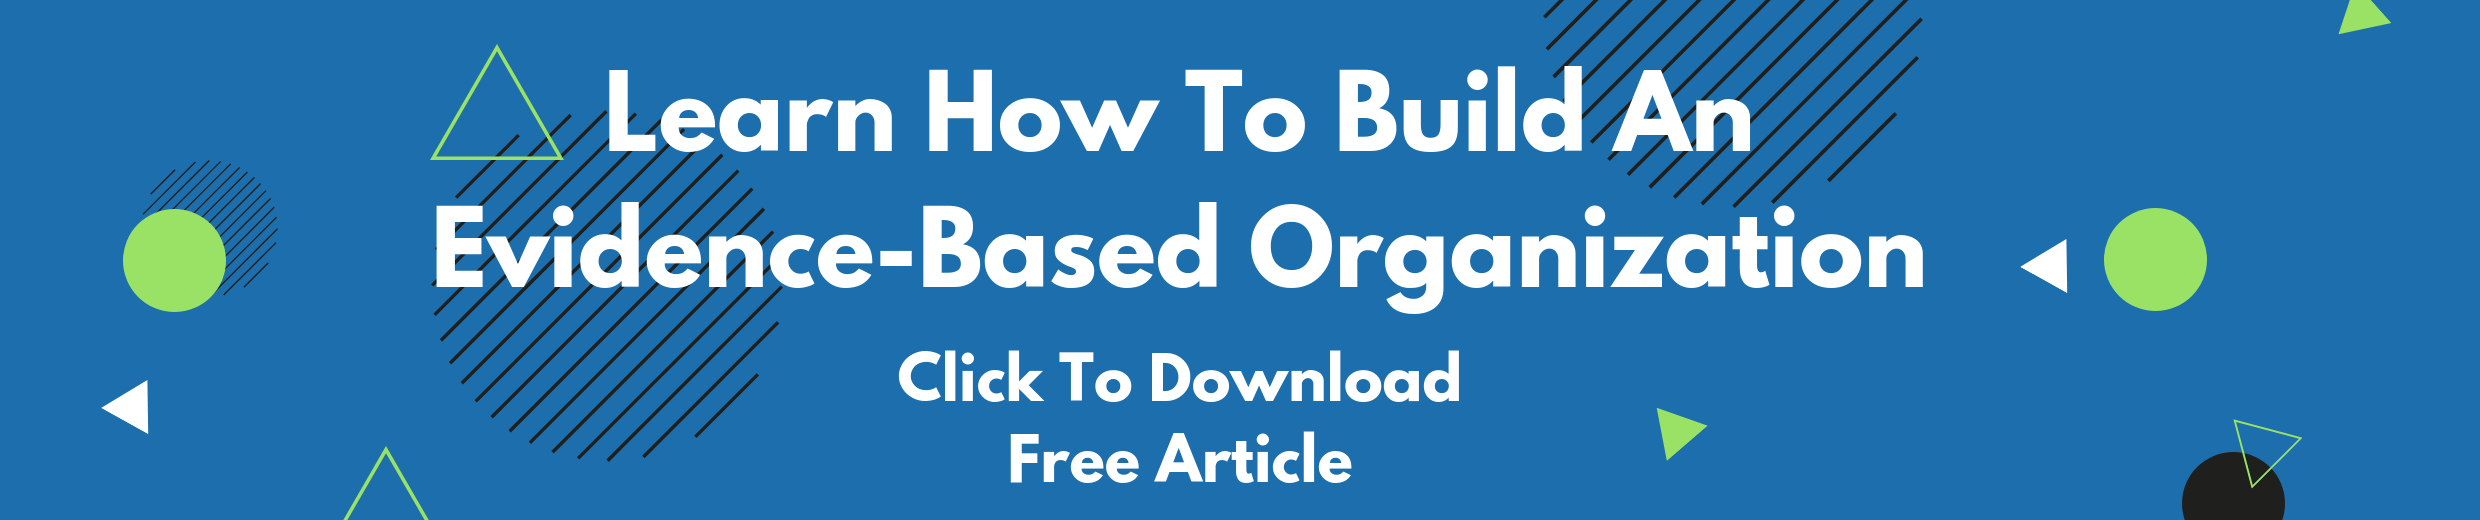 evidence based organizations free article